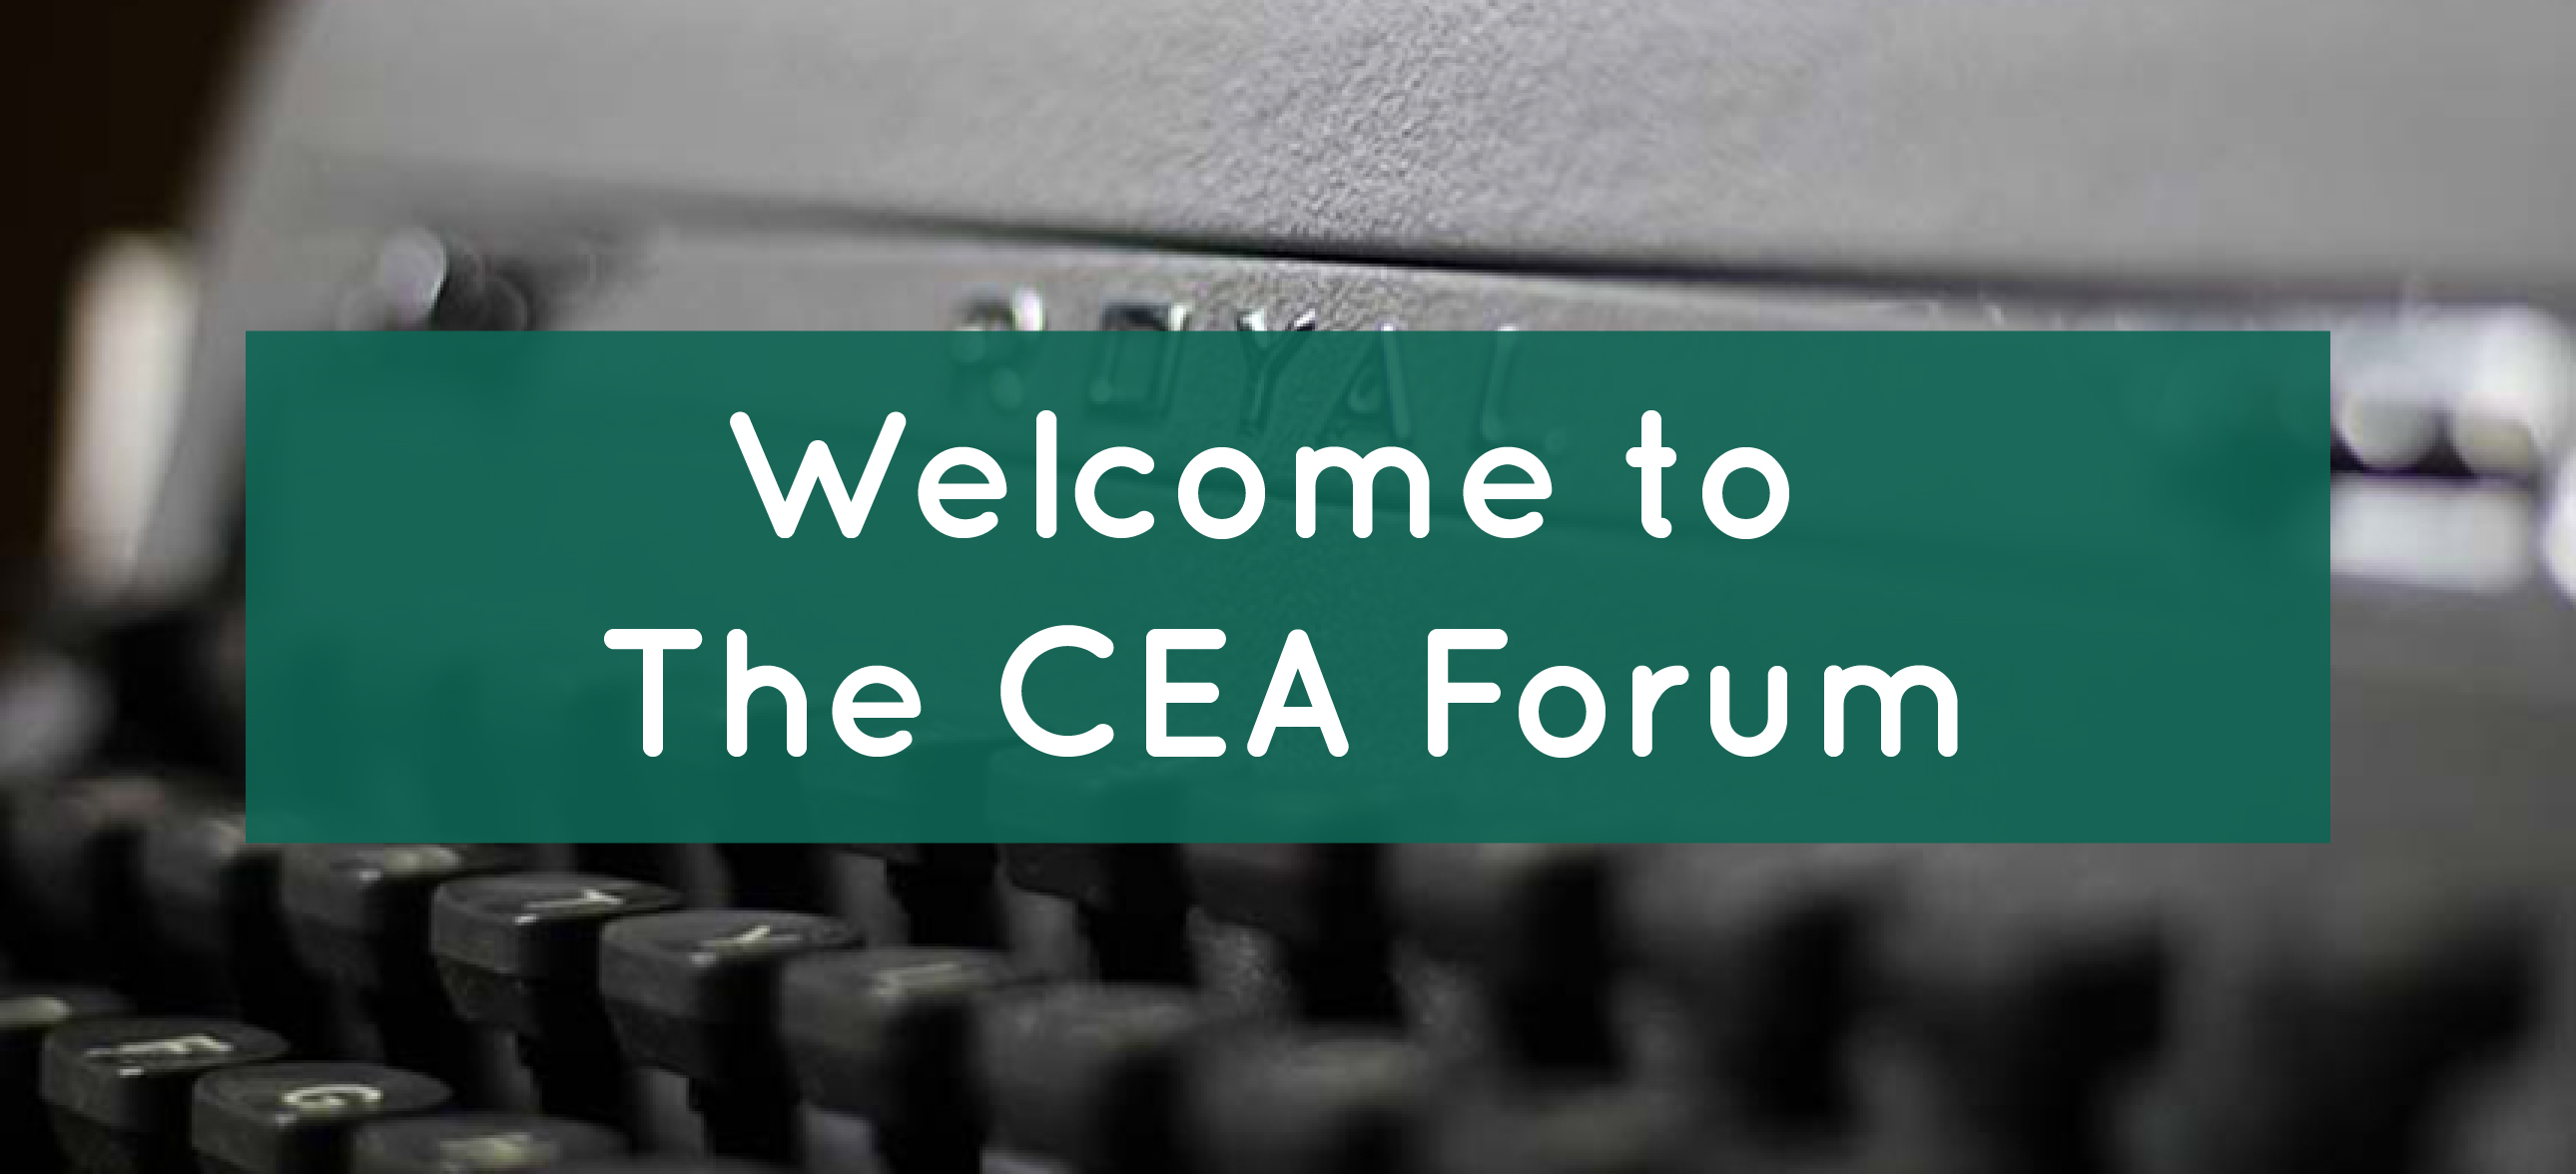 The words Welcome to The CEA Forum on a typewriter background.